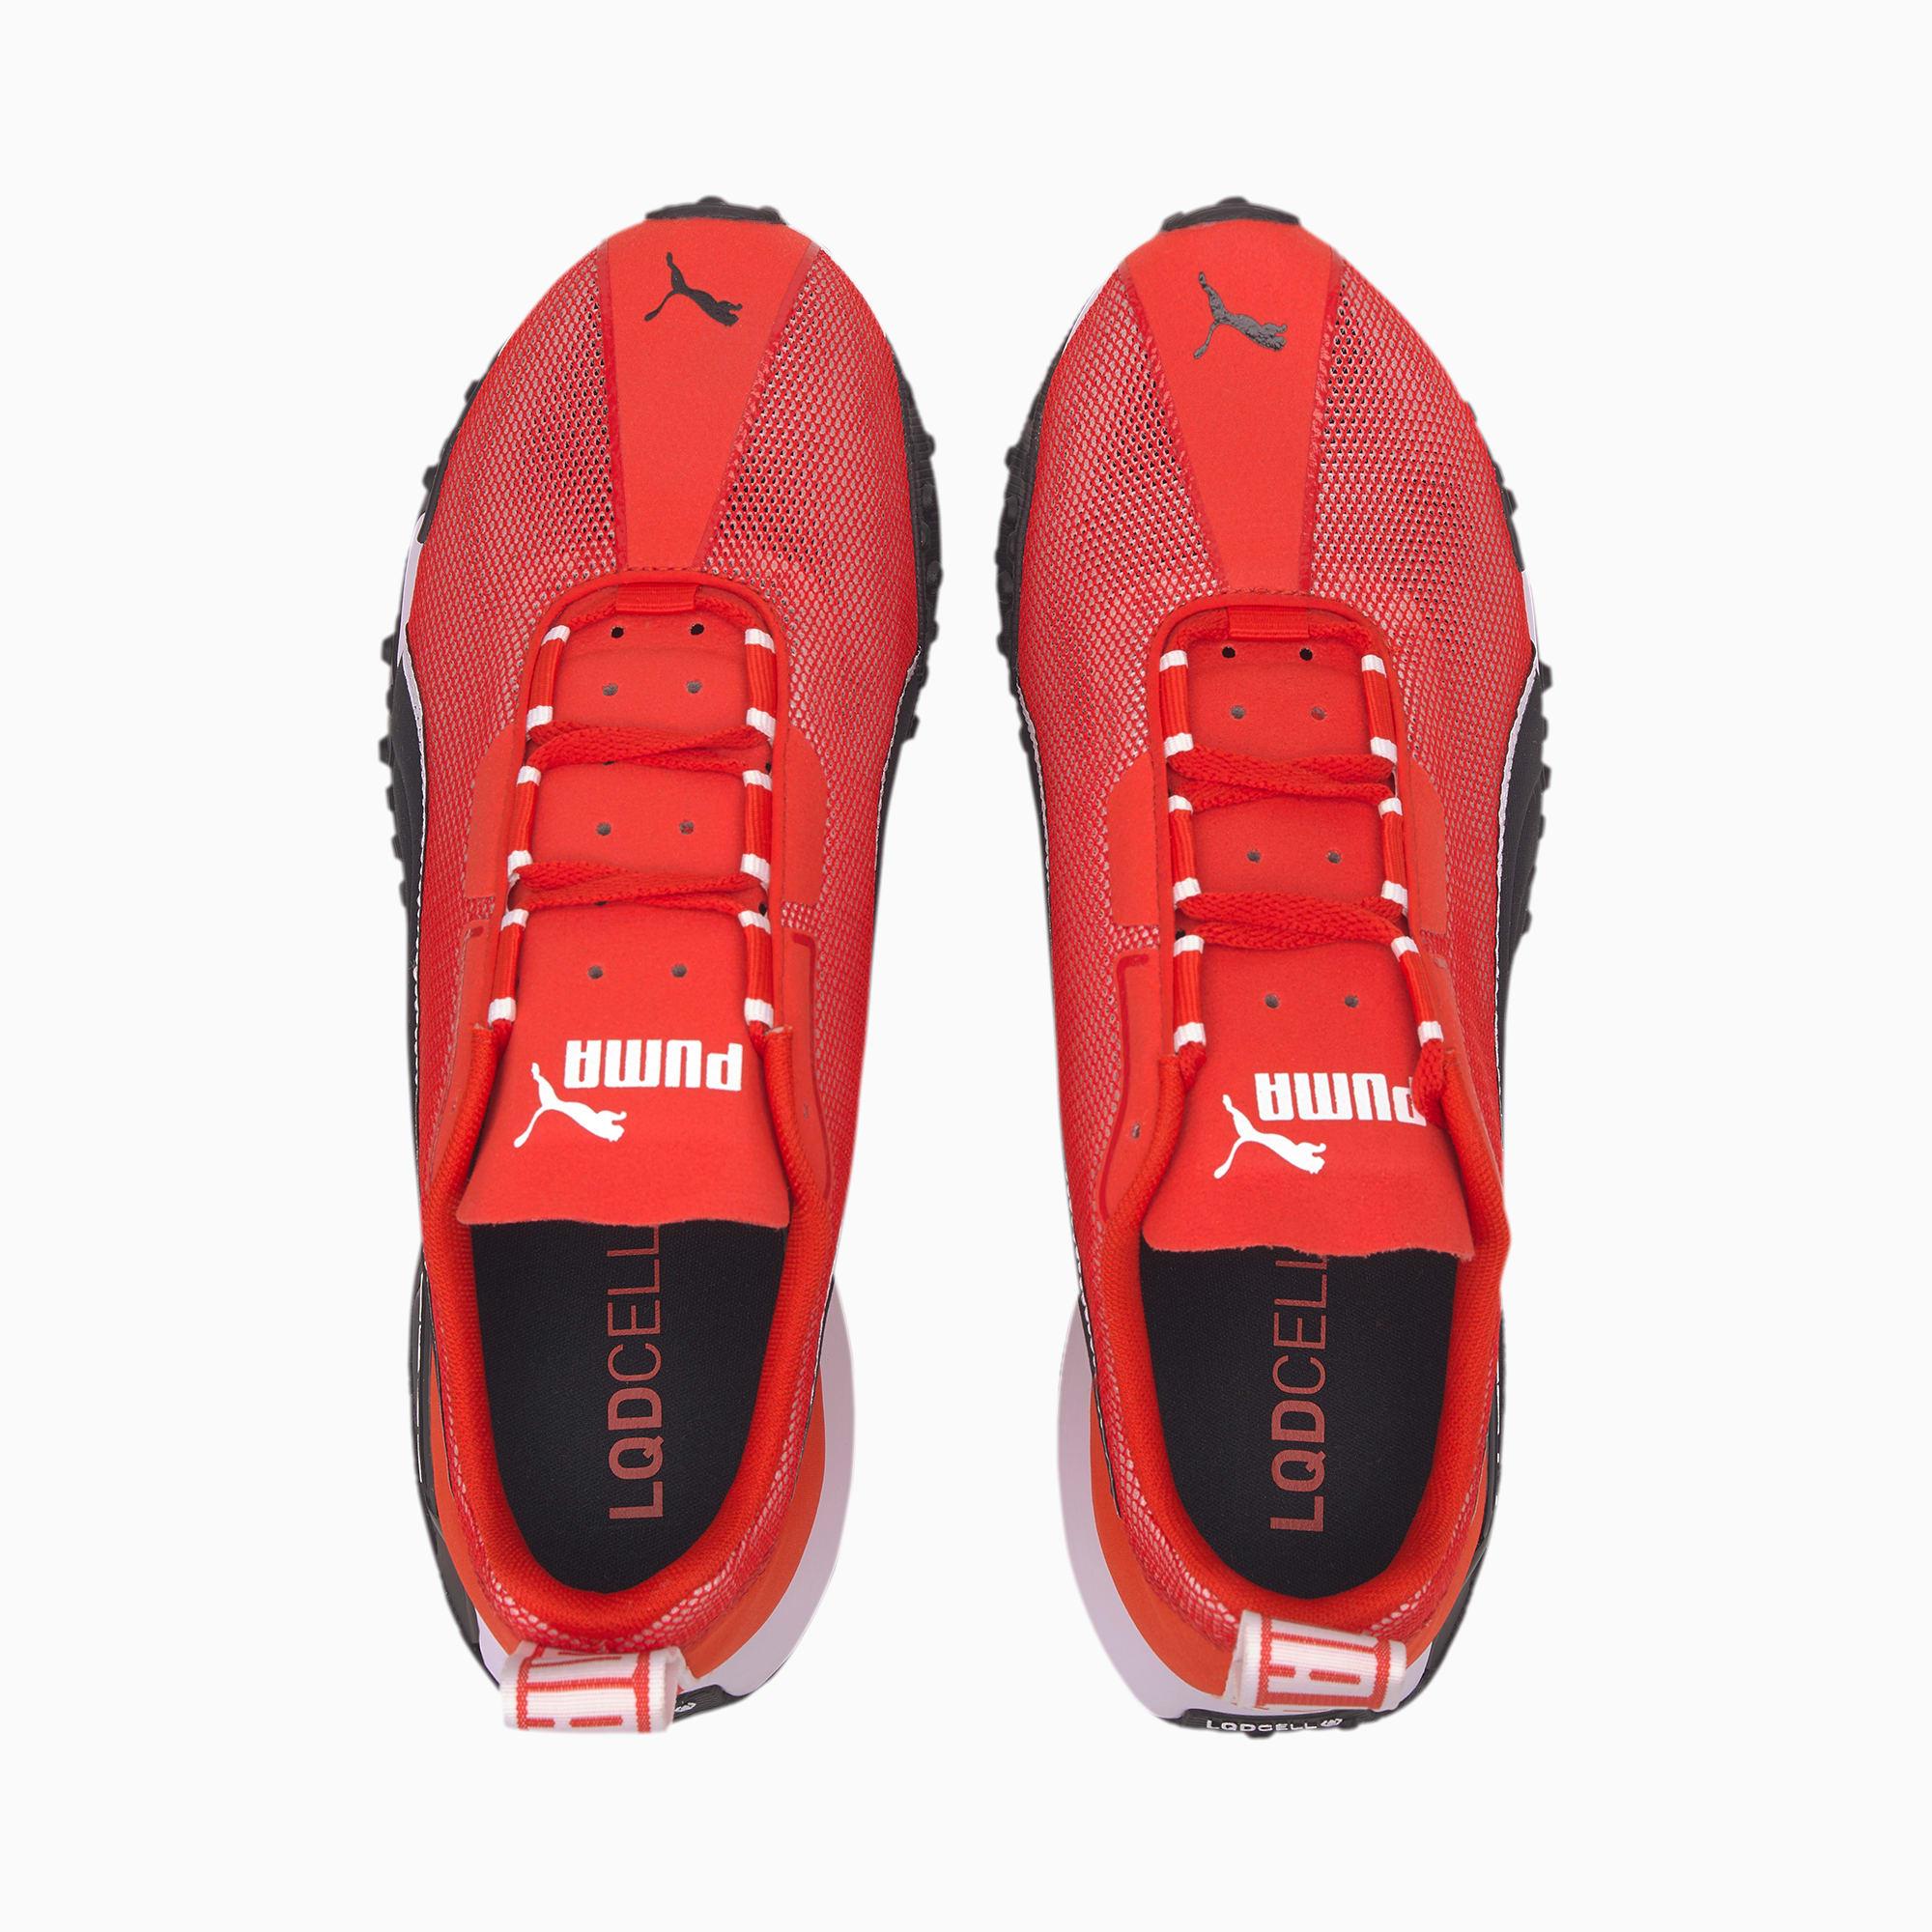 PUMA Rubber H.st.20 Training Shoes in Red for Men - Lyst